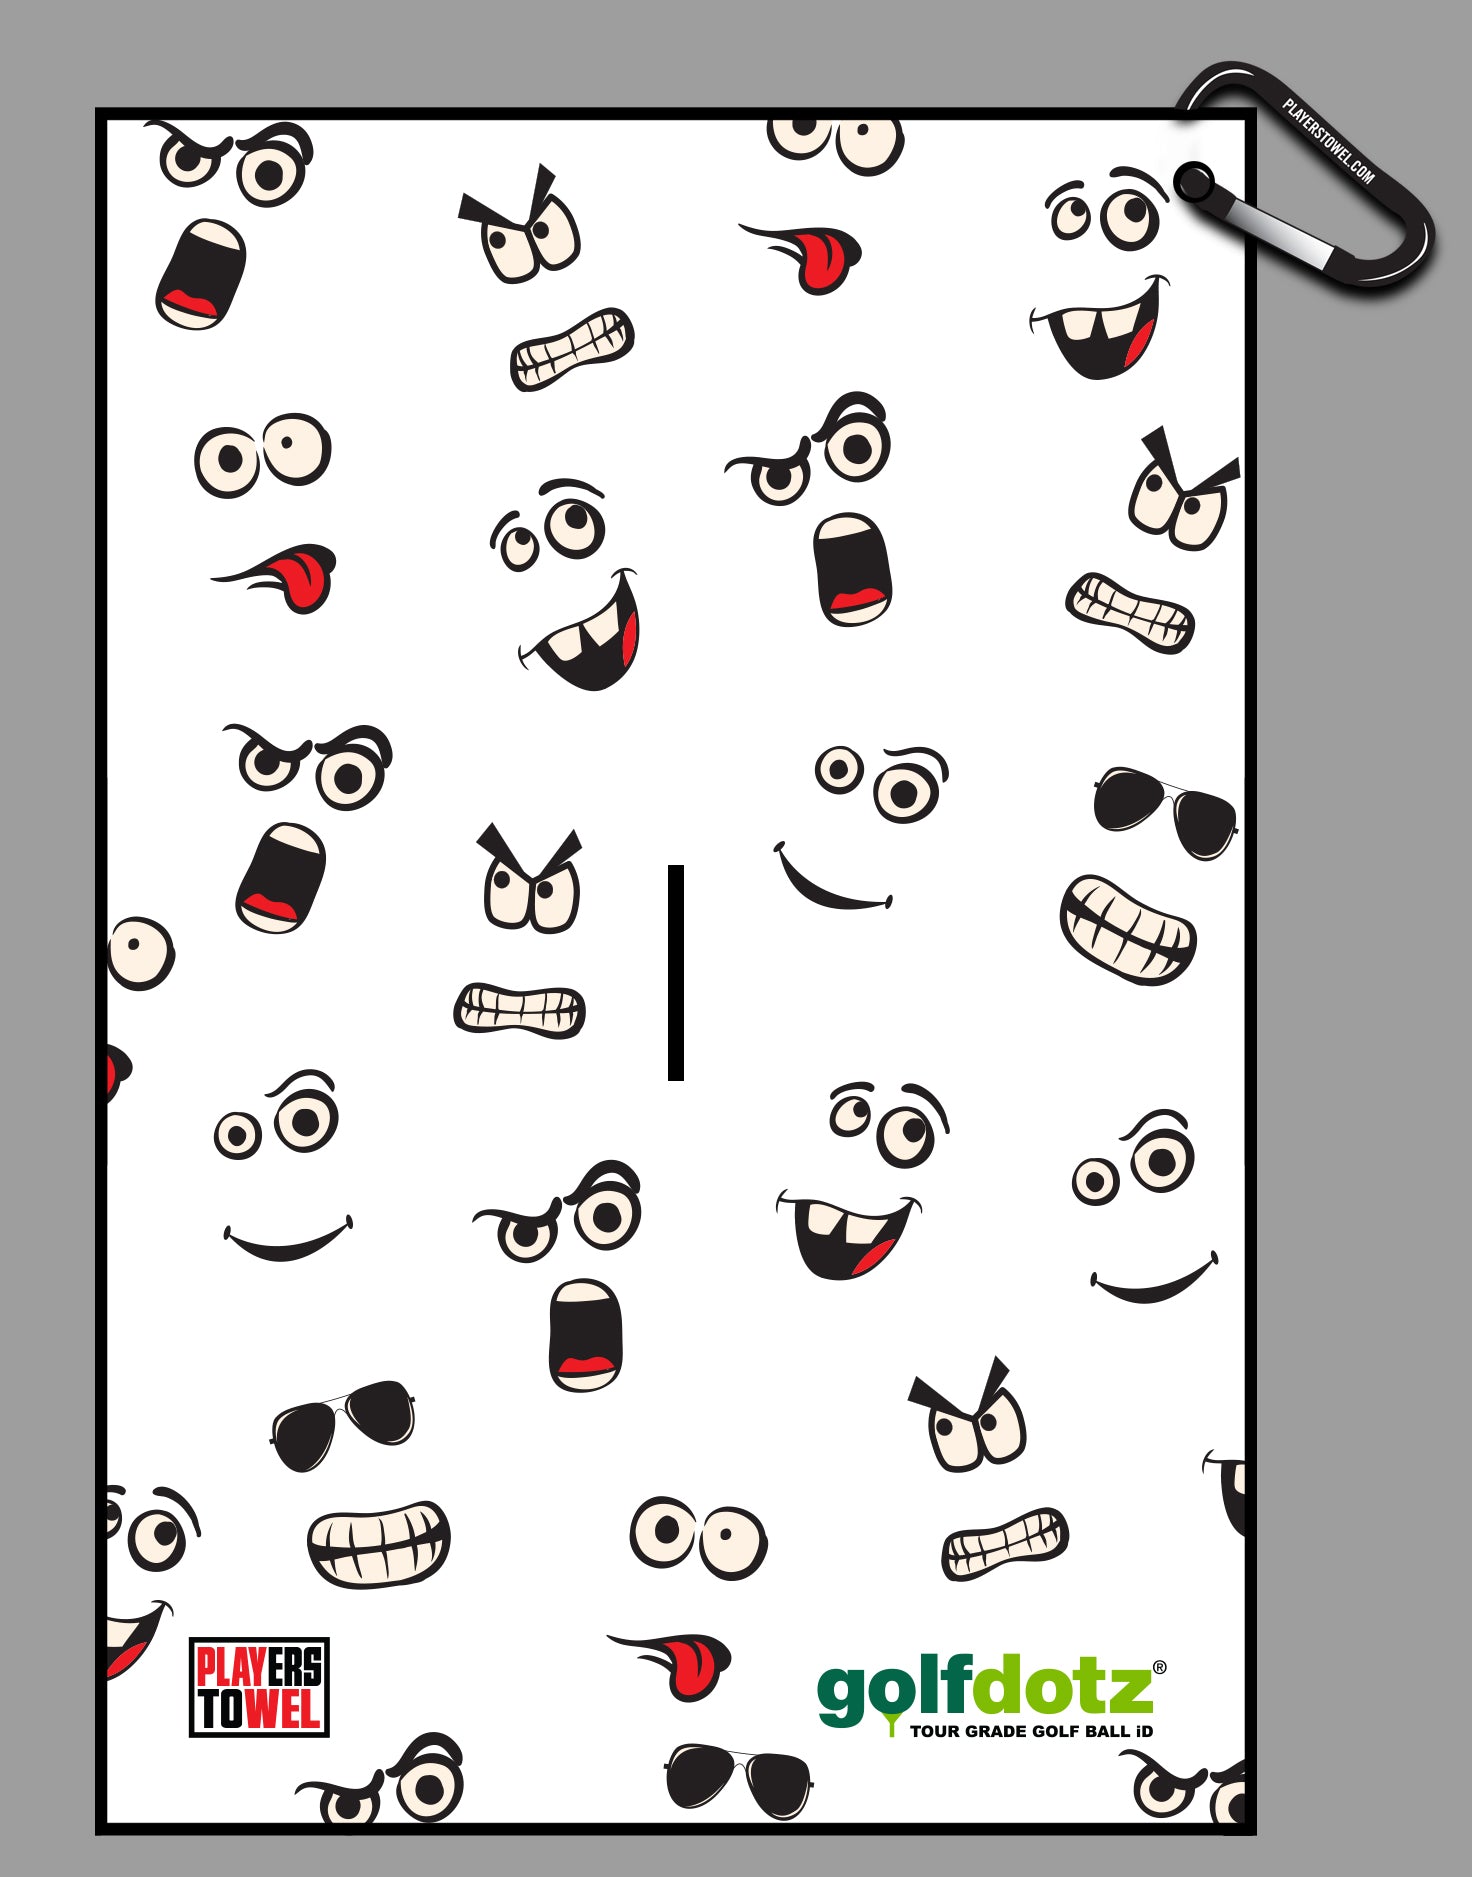 Hilarious Golf Towel with funny faces